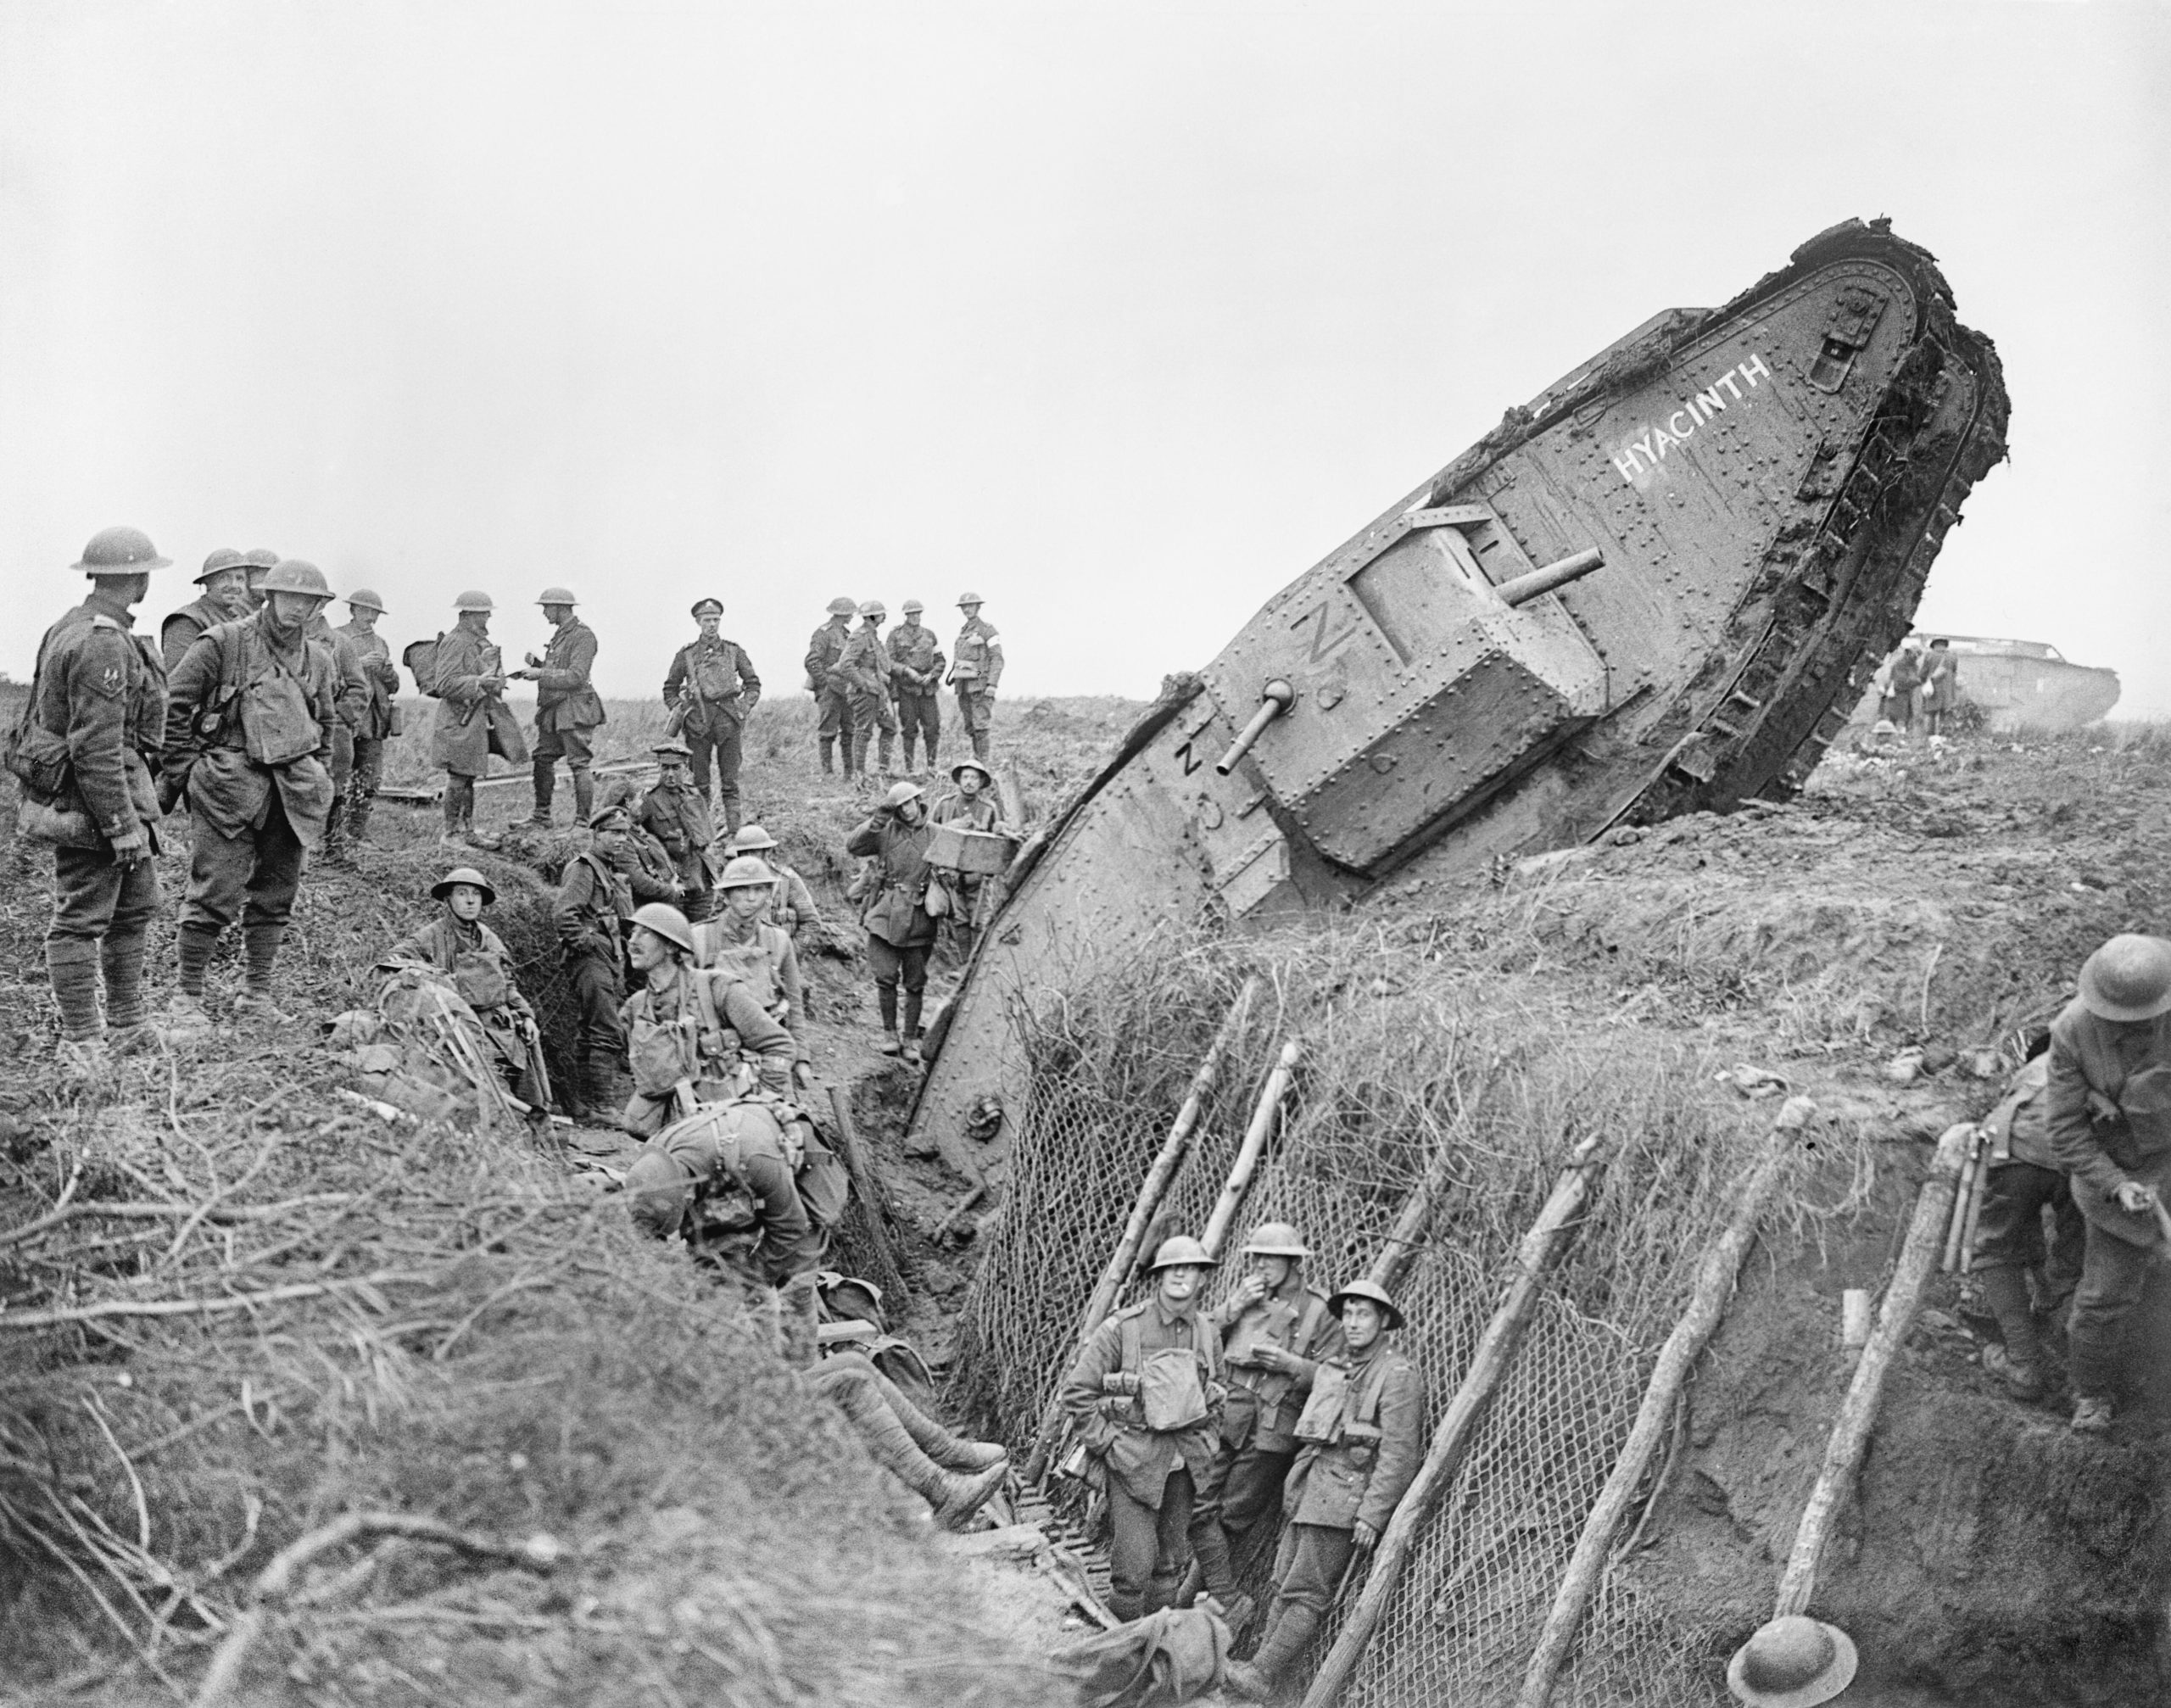 A British Mark IV (Male) tank during the Battle of Cambrai, France, November-December 1917 (Imperial War Museums)